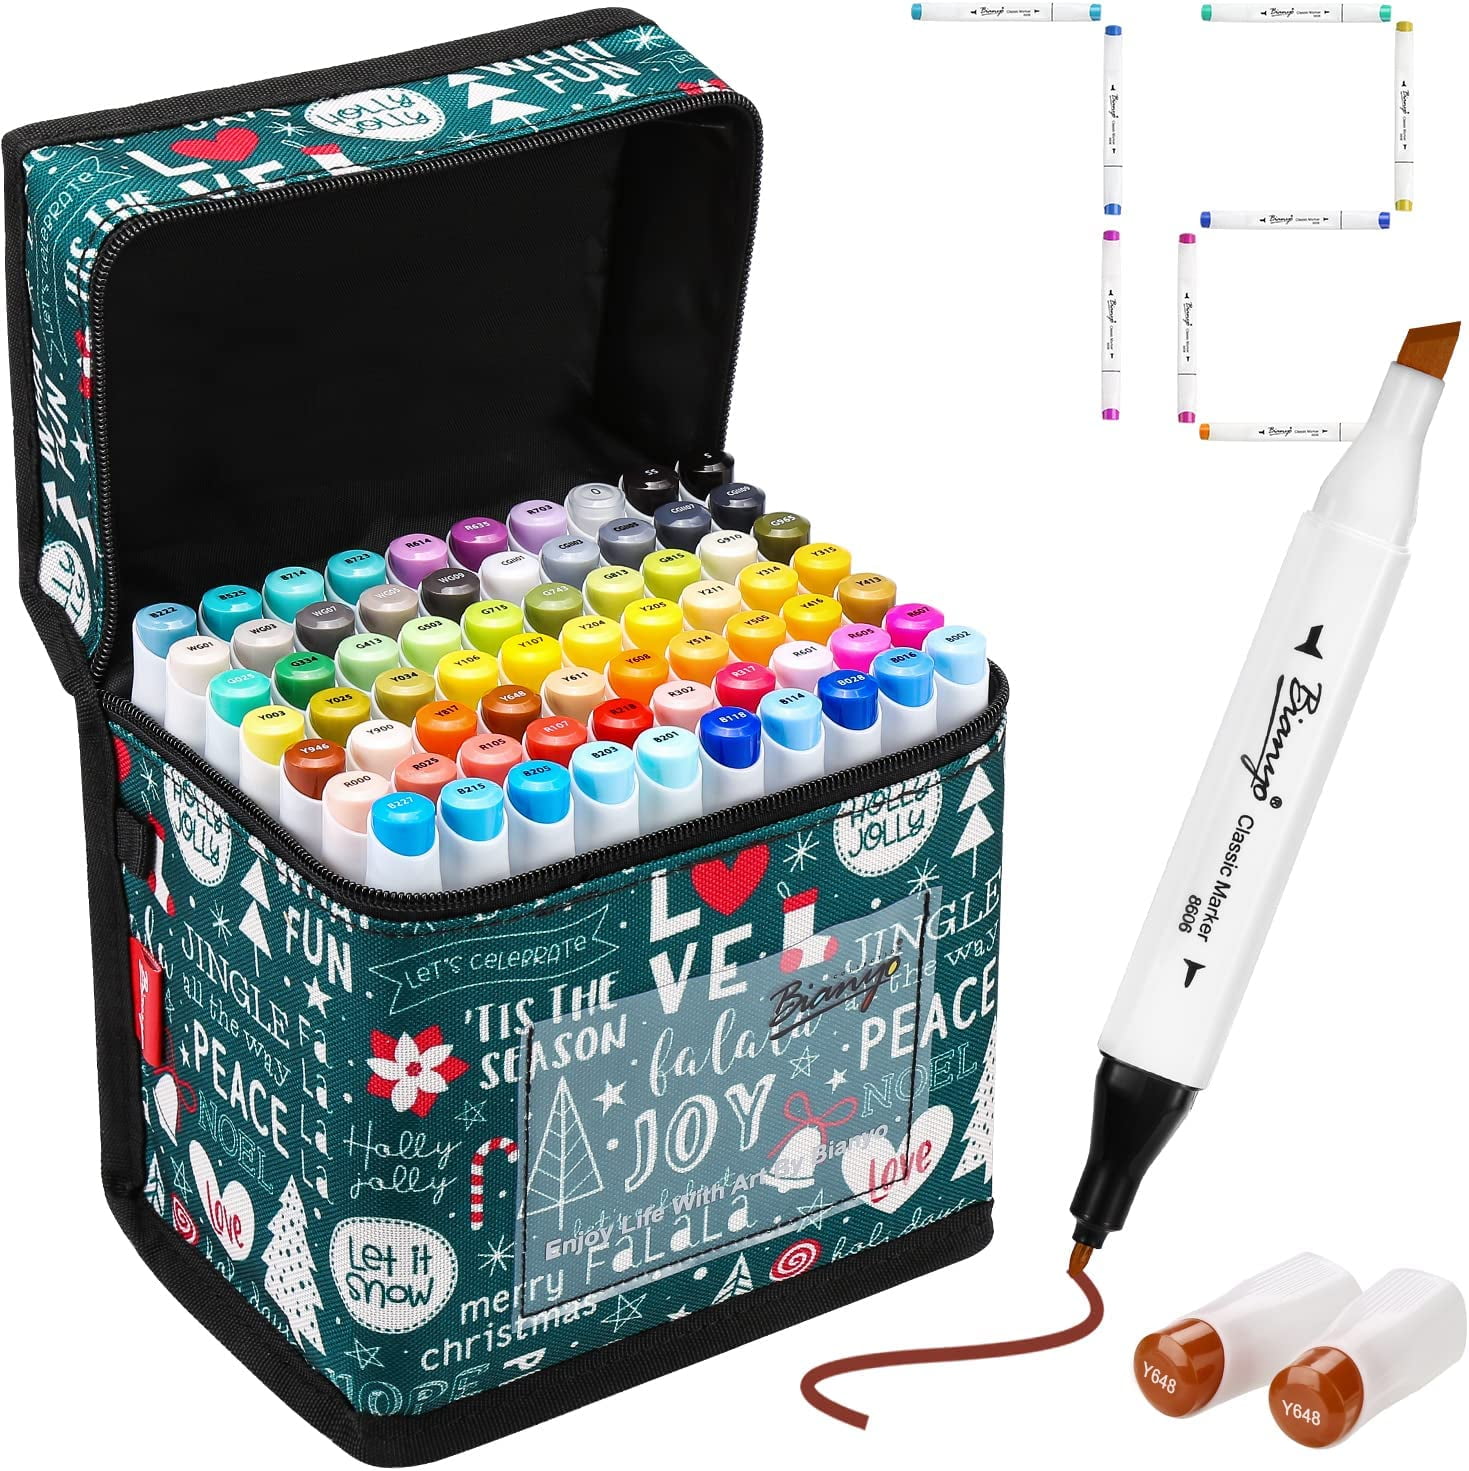 Bianyo 72 Primary Colors Alcohol-Based Dual Tip Bullet & Chisel Art Markers  Set with Christmas Gift Bag